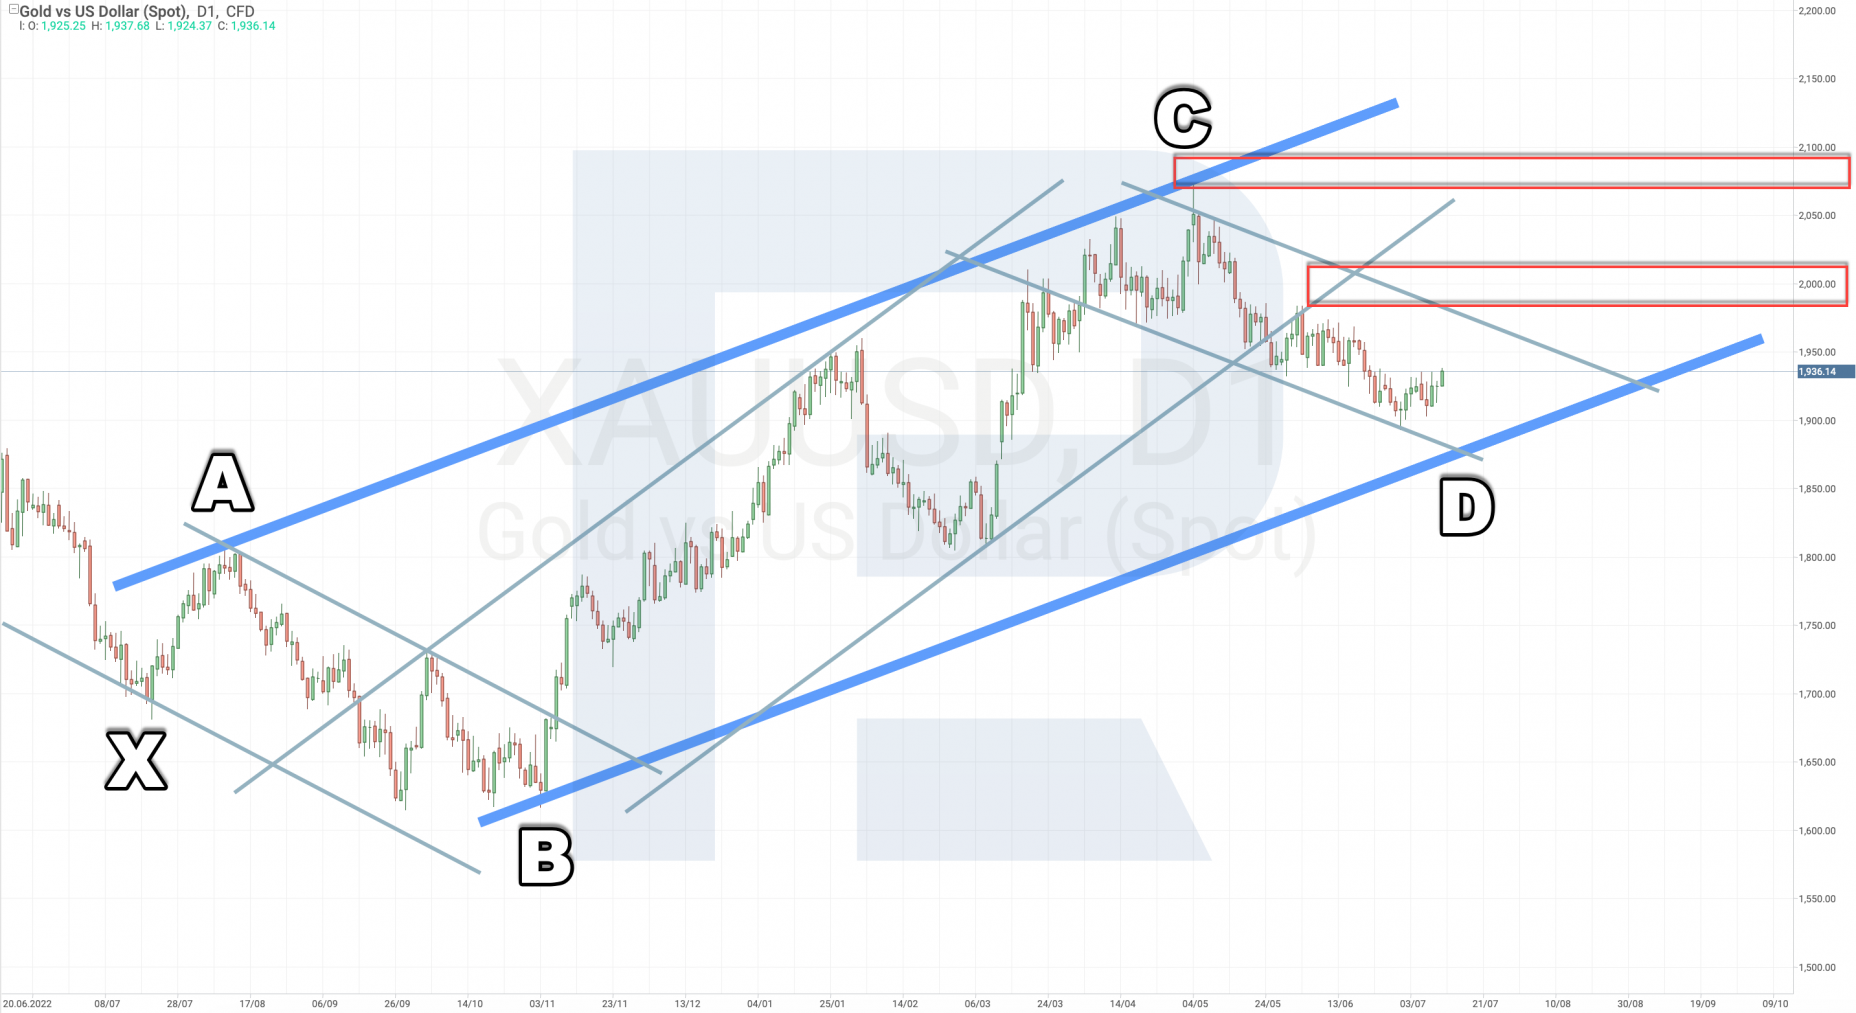 Technical analysis of gold prices